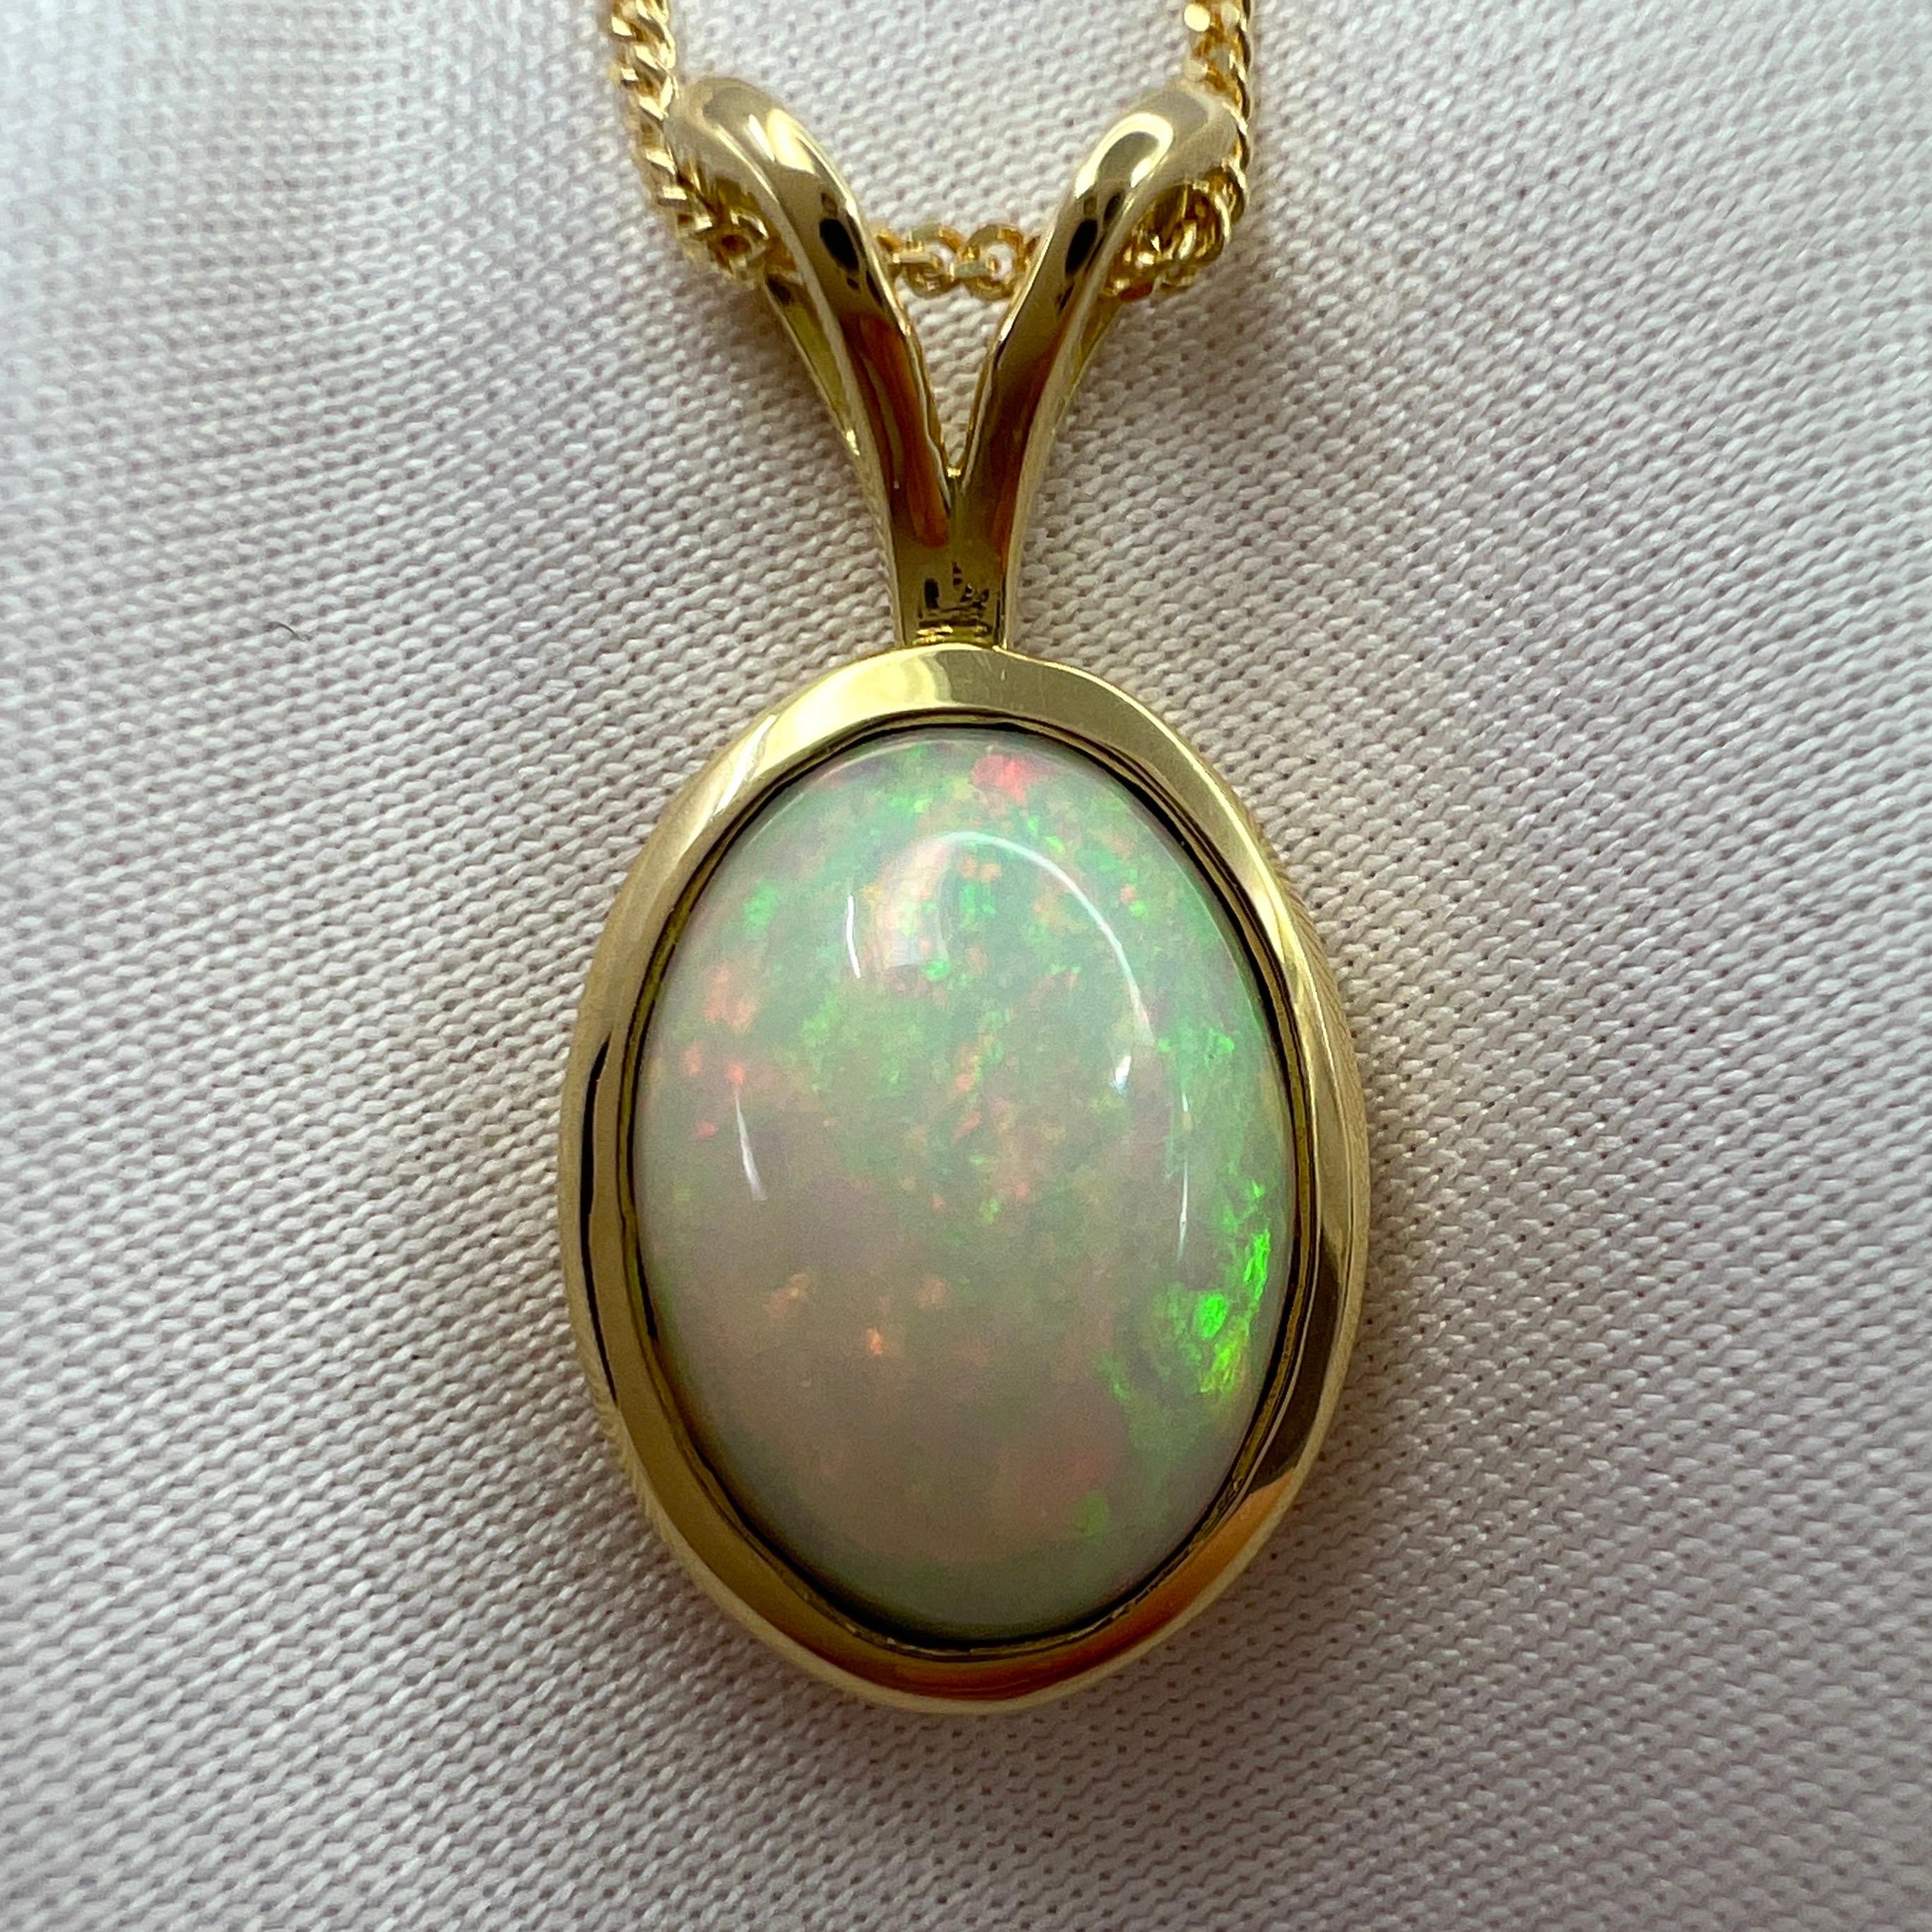 Fine White Opal 18 Karat Yellow Gold Pendant Necklace

2.61 Carat opal with beautiful play of colour and an excellent oval cabochon cut. Set in a fine 18k yellow gold rubover solitaire pendant. Stunning opal with an excellent polish and lots of